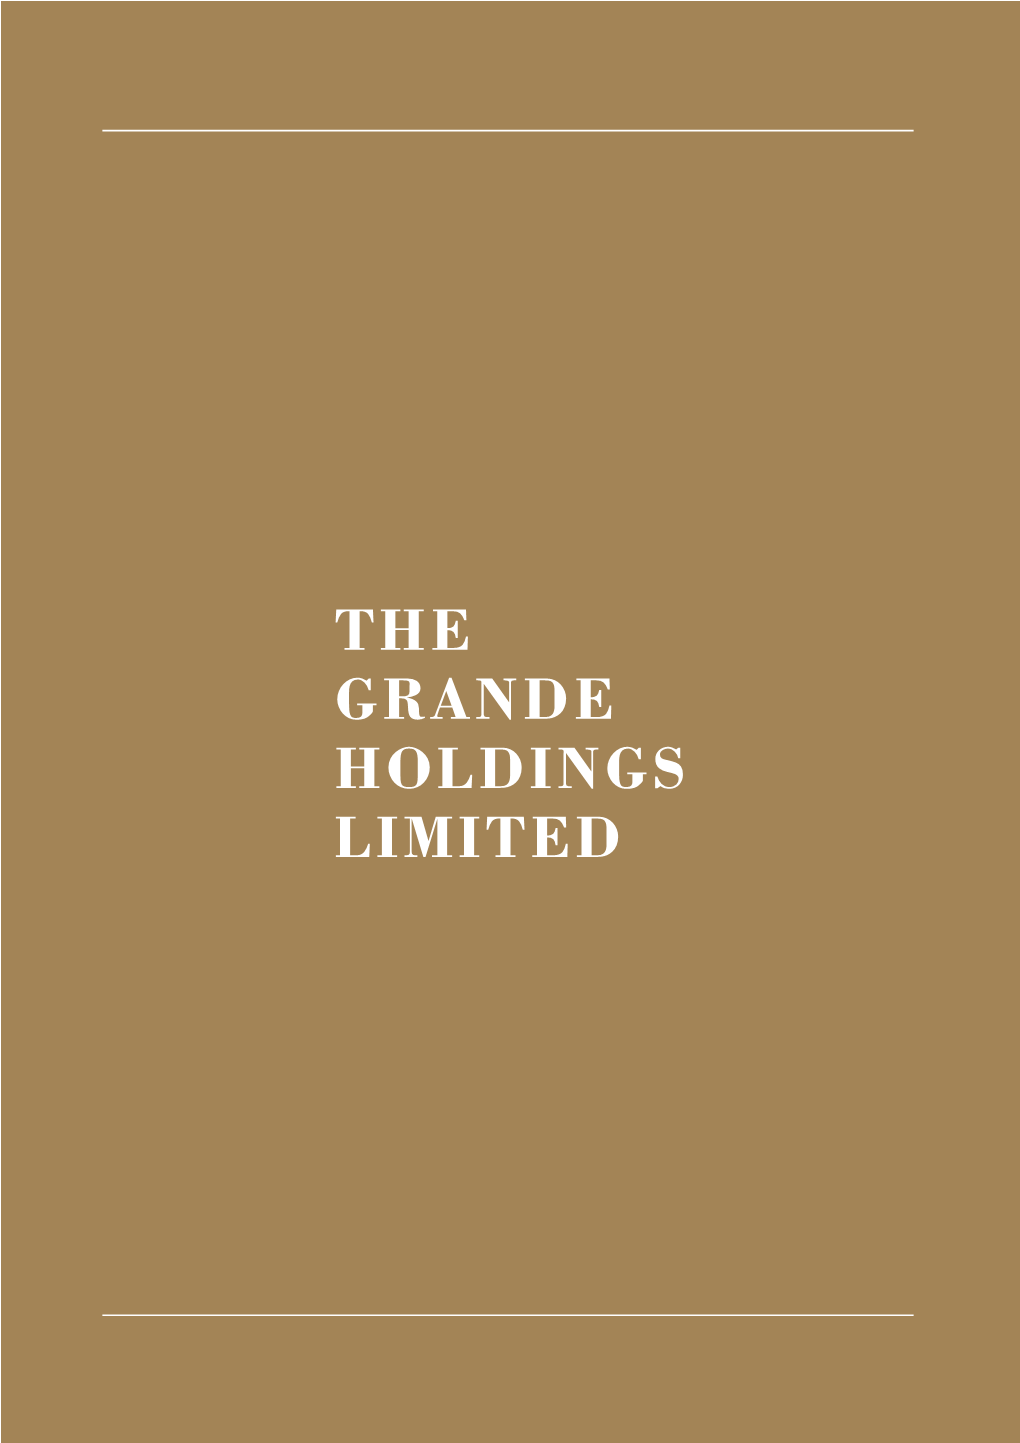 The Grande Holdings Limited 2 the Grande Holdings Limited